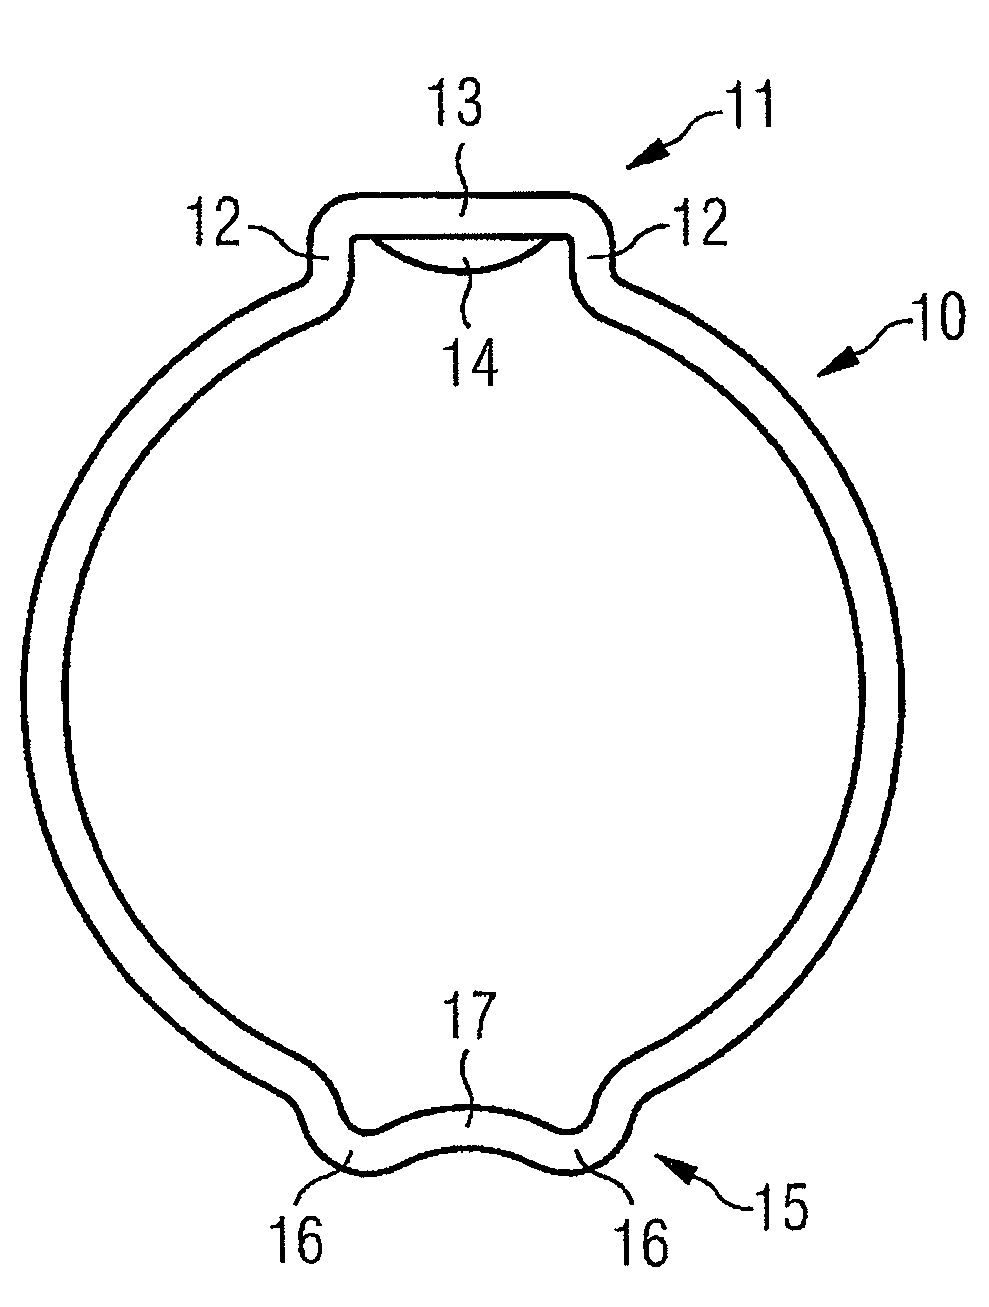 Clamping ring for fastening a gas generating cartridge